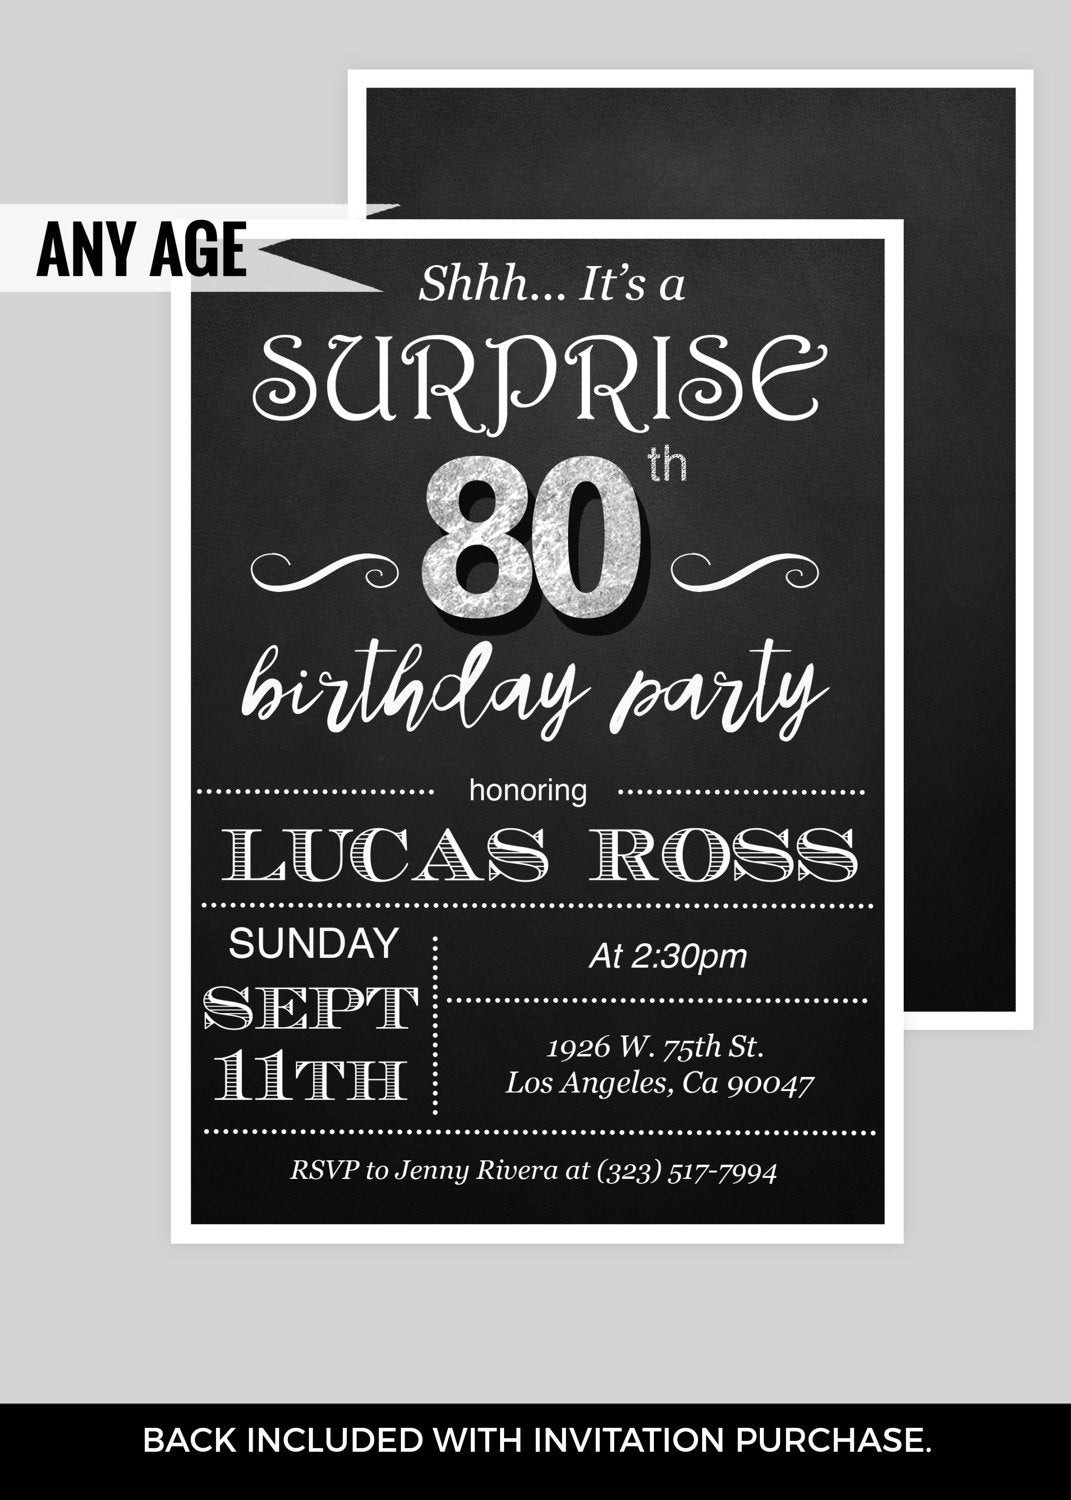 Surprise 80th Birthday Party Invitations
 Surprise 80th birthday party invitations by DIYPartyInvitation